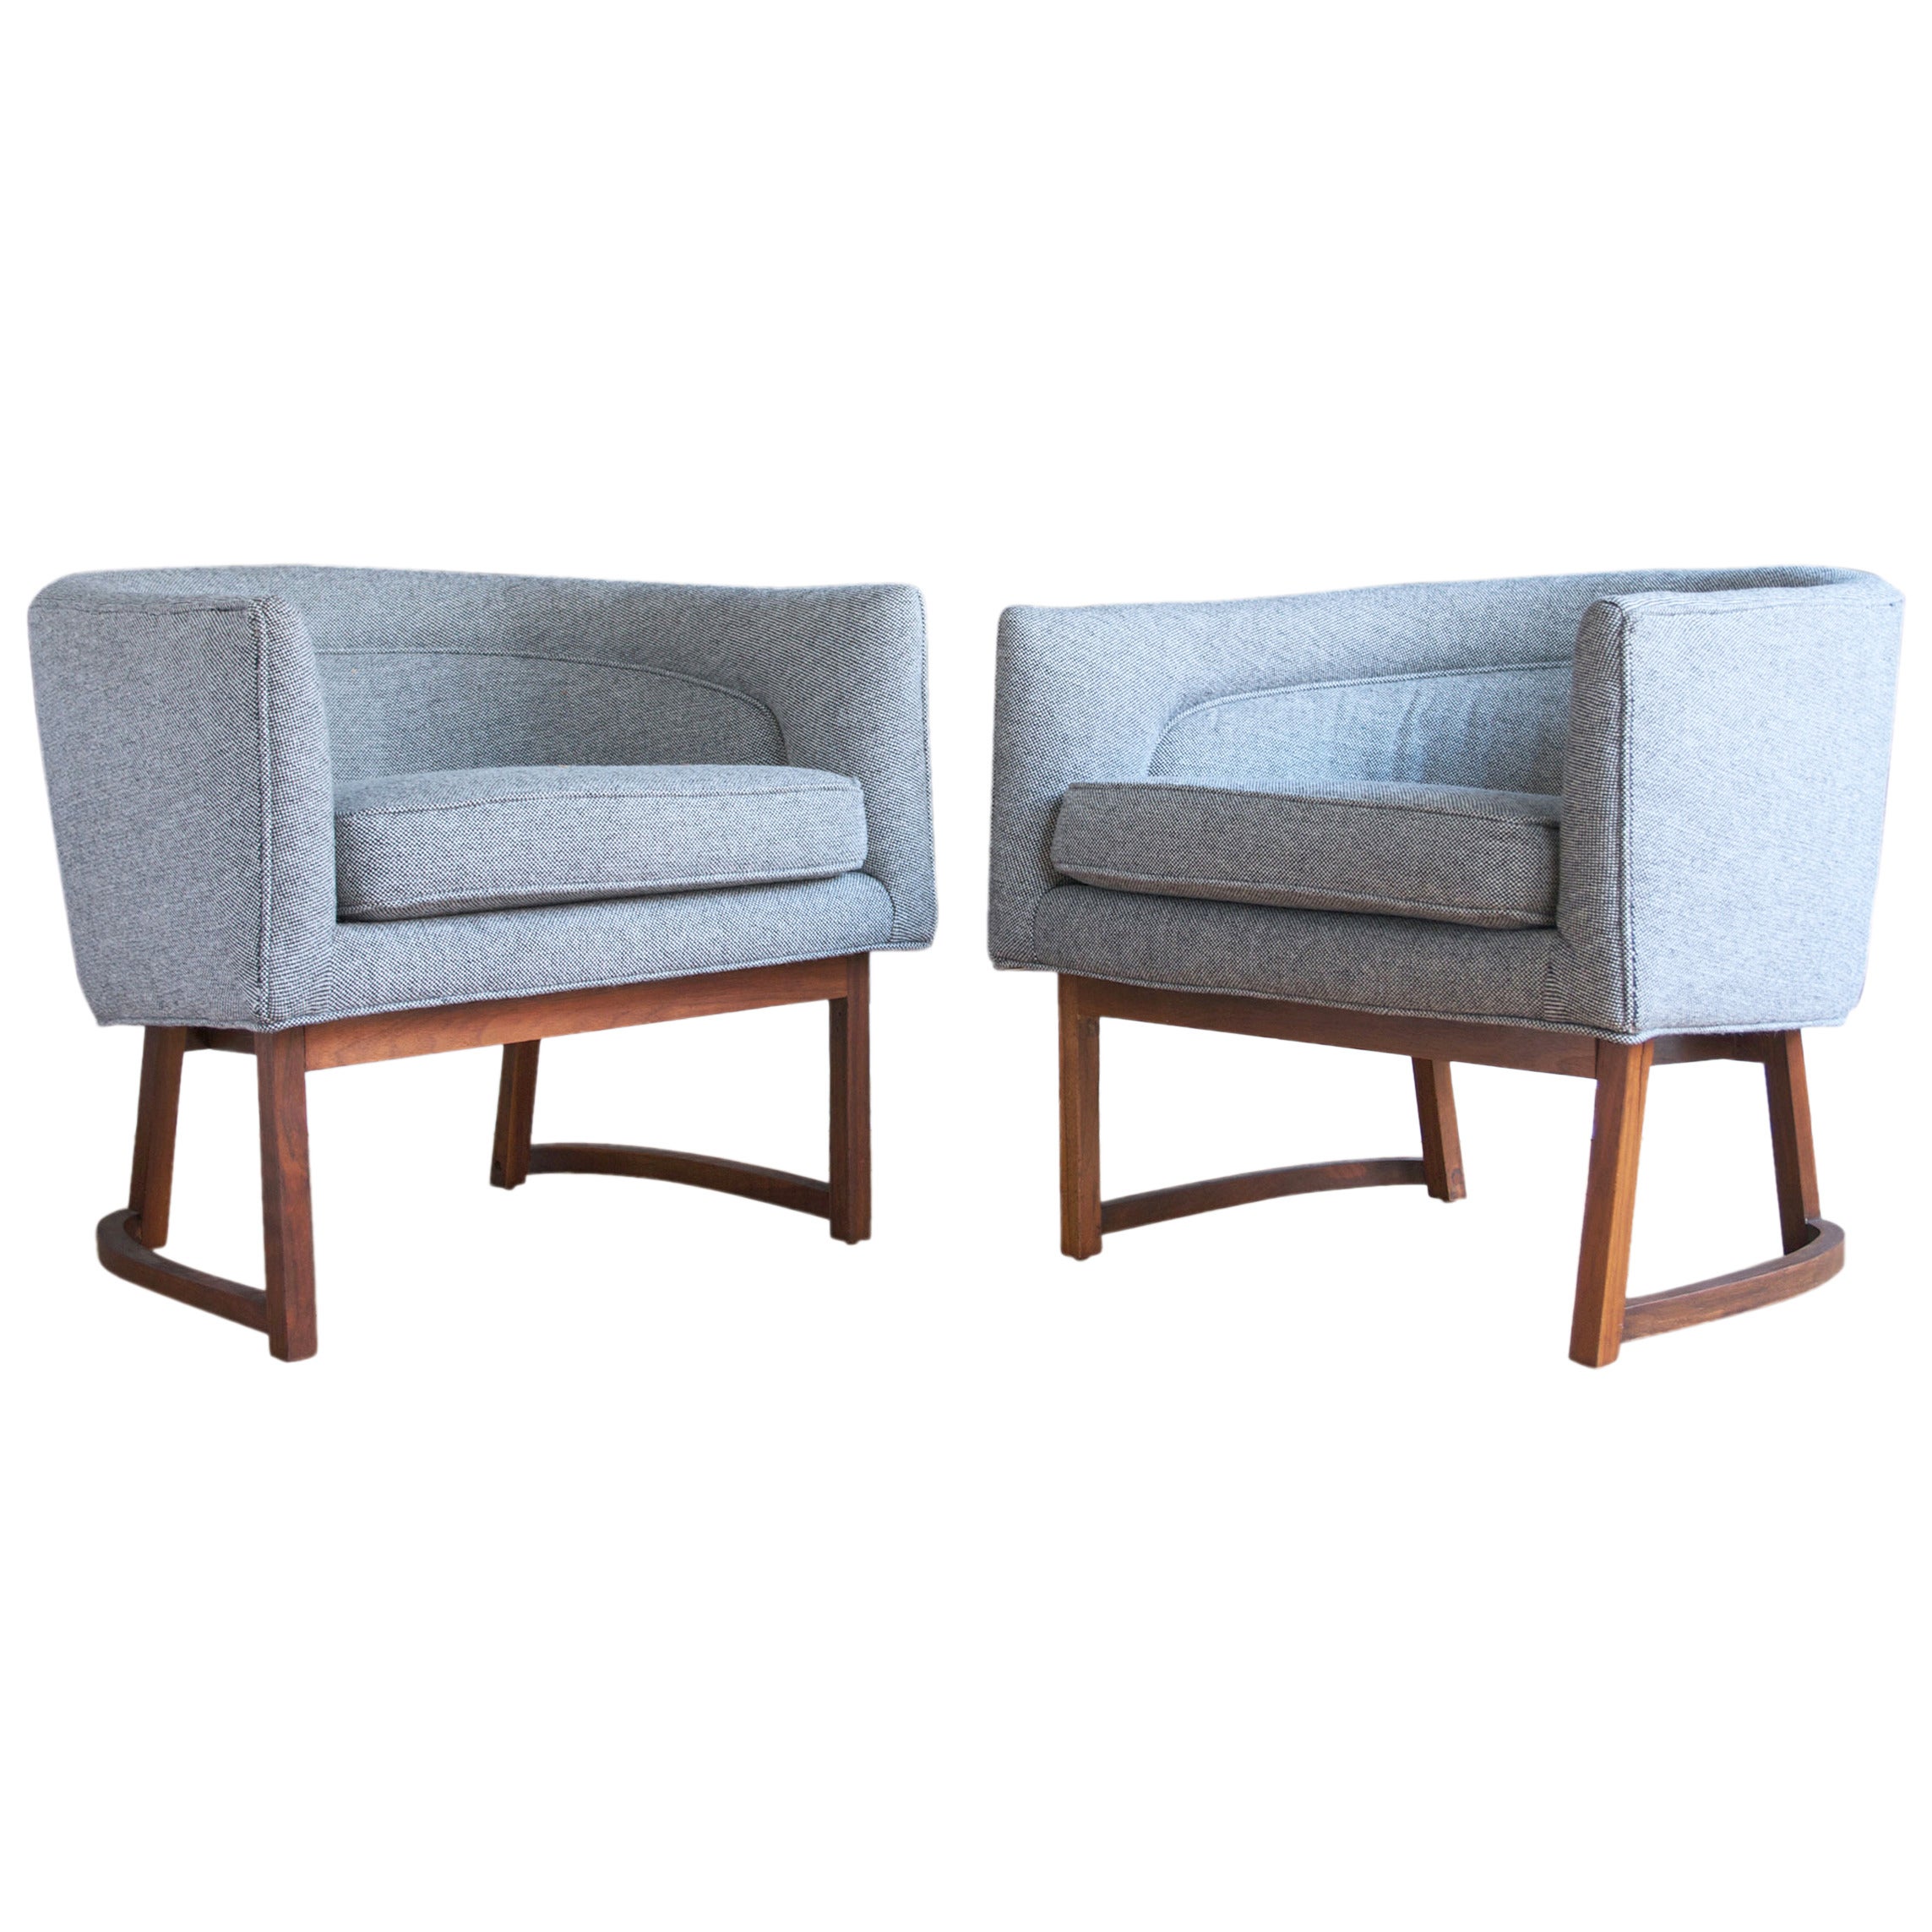 Pair of Tub Chairs by Milo Baughman